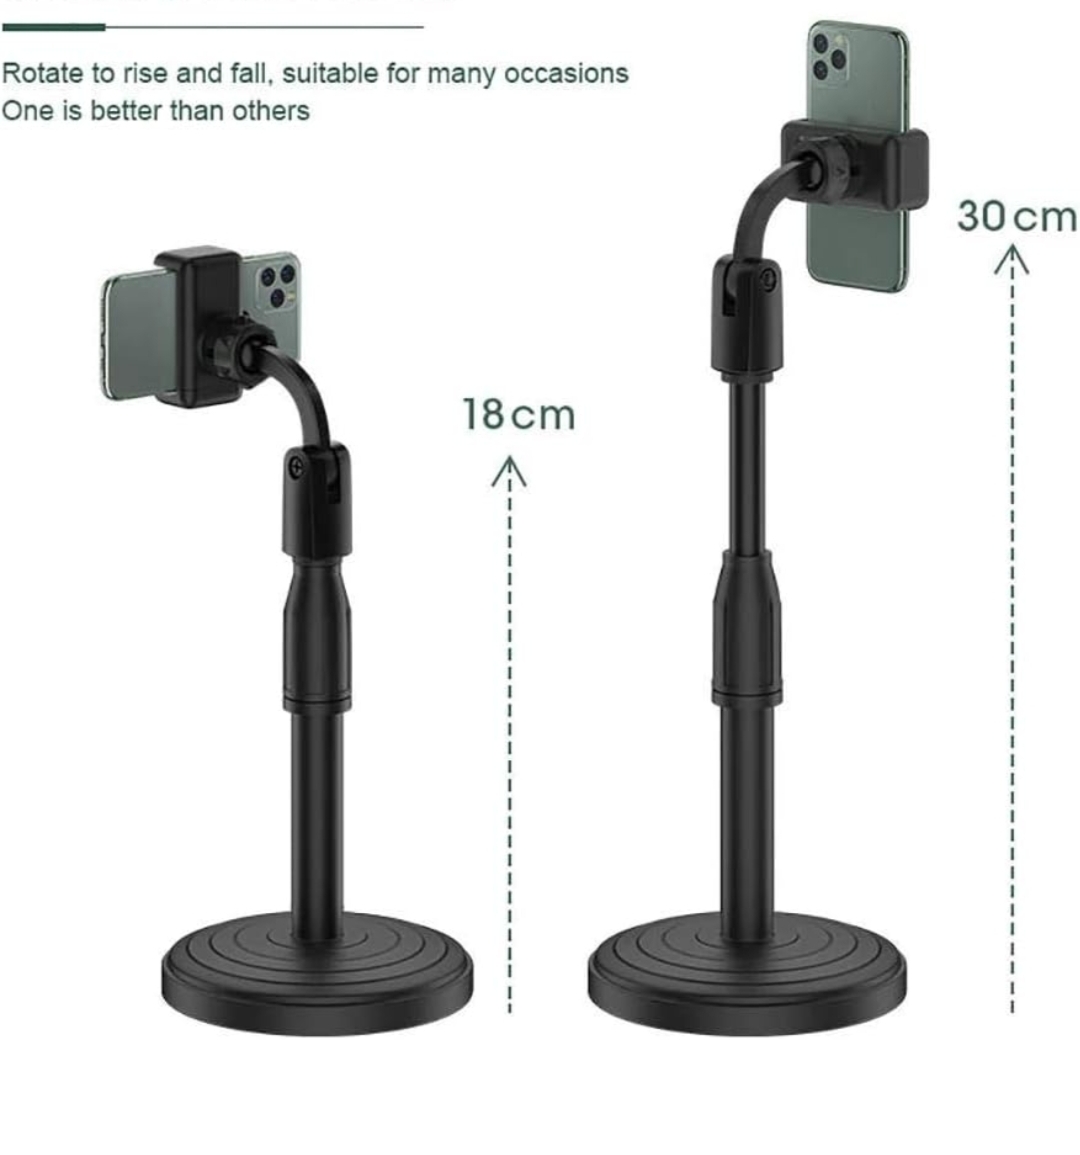 Mobile Phone Stand Multi-Angle Adjustable Desk Mount Holder 360 Rotate for Online Classes Live Streaming Shoot Video, Universal Compatible with All iPhone/Android Smartphone